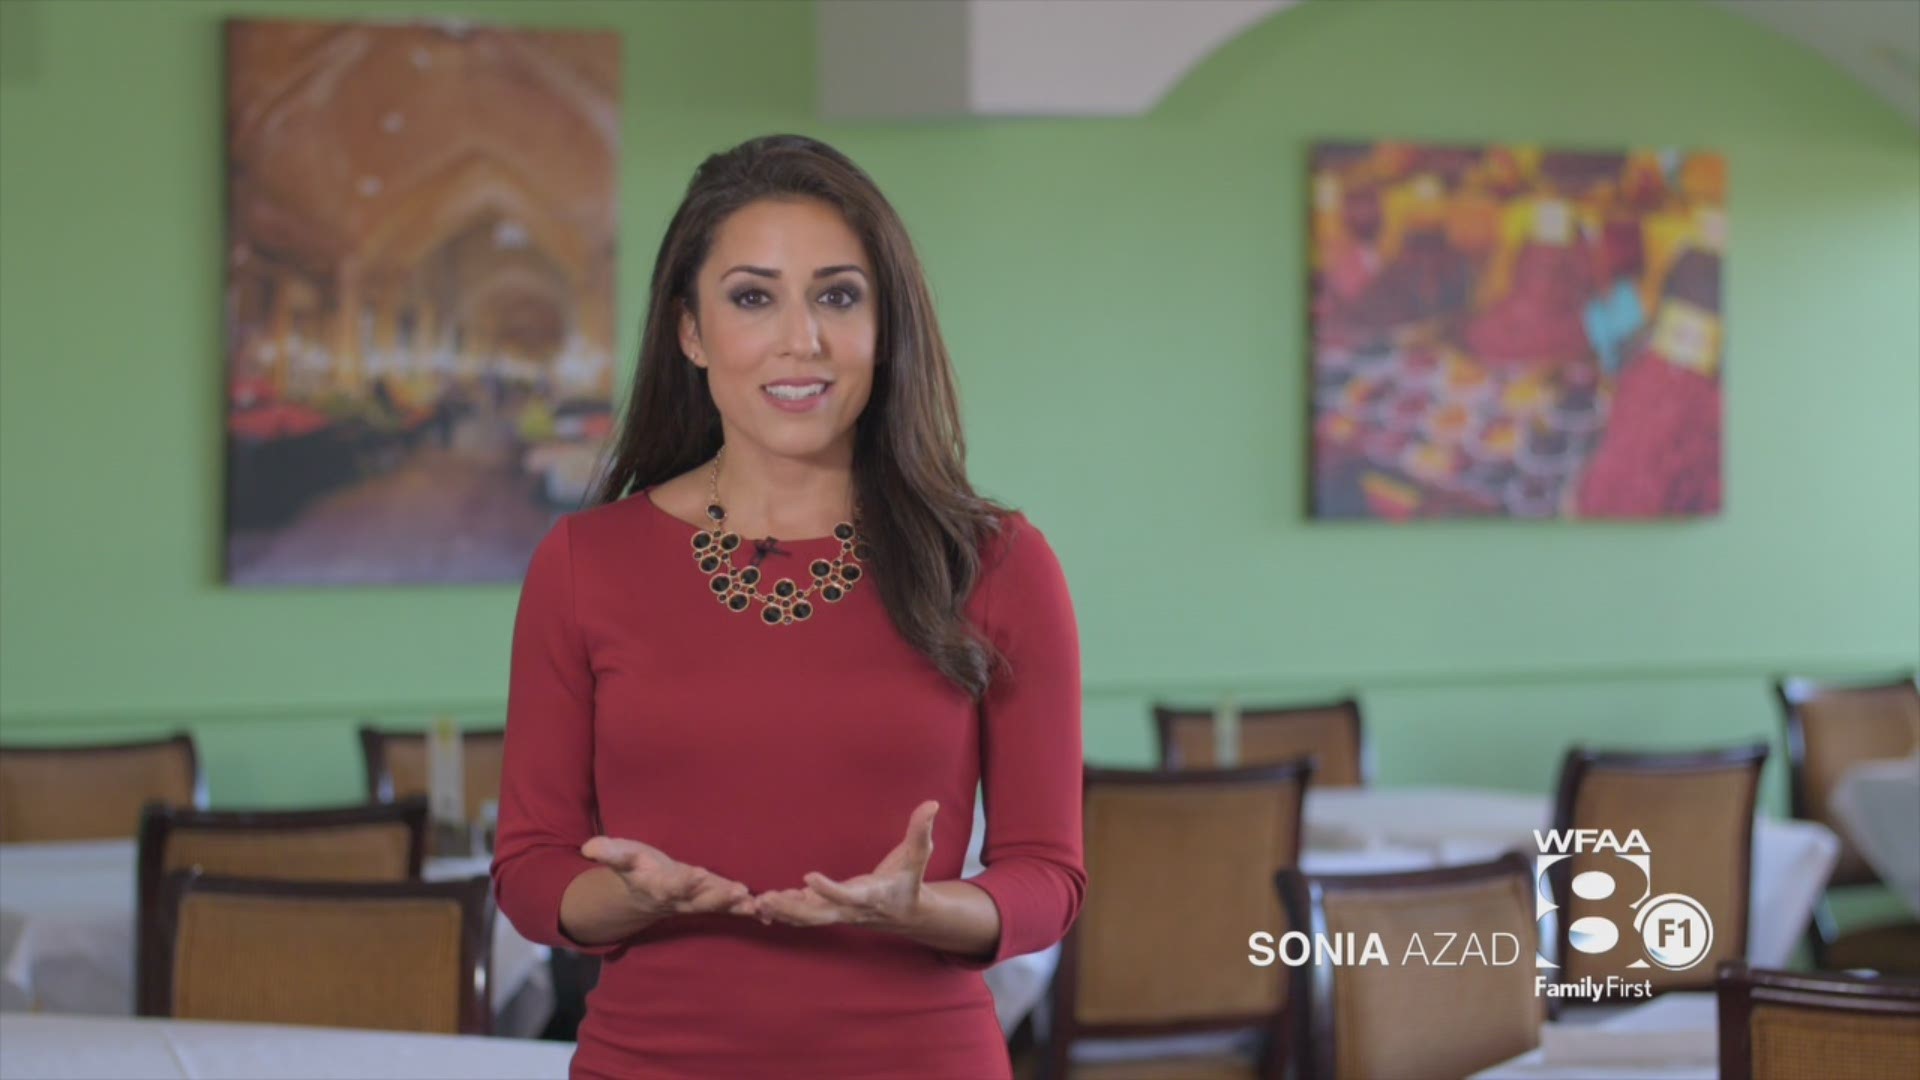 News 8's Sonia Azad talks about having healthy food options at family gatherings that everyone can enjoy including diabetics.